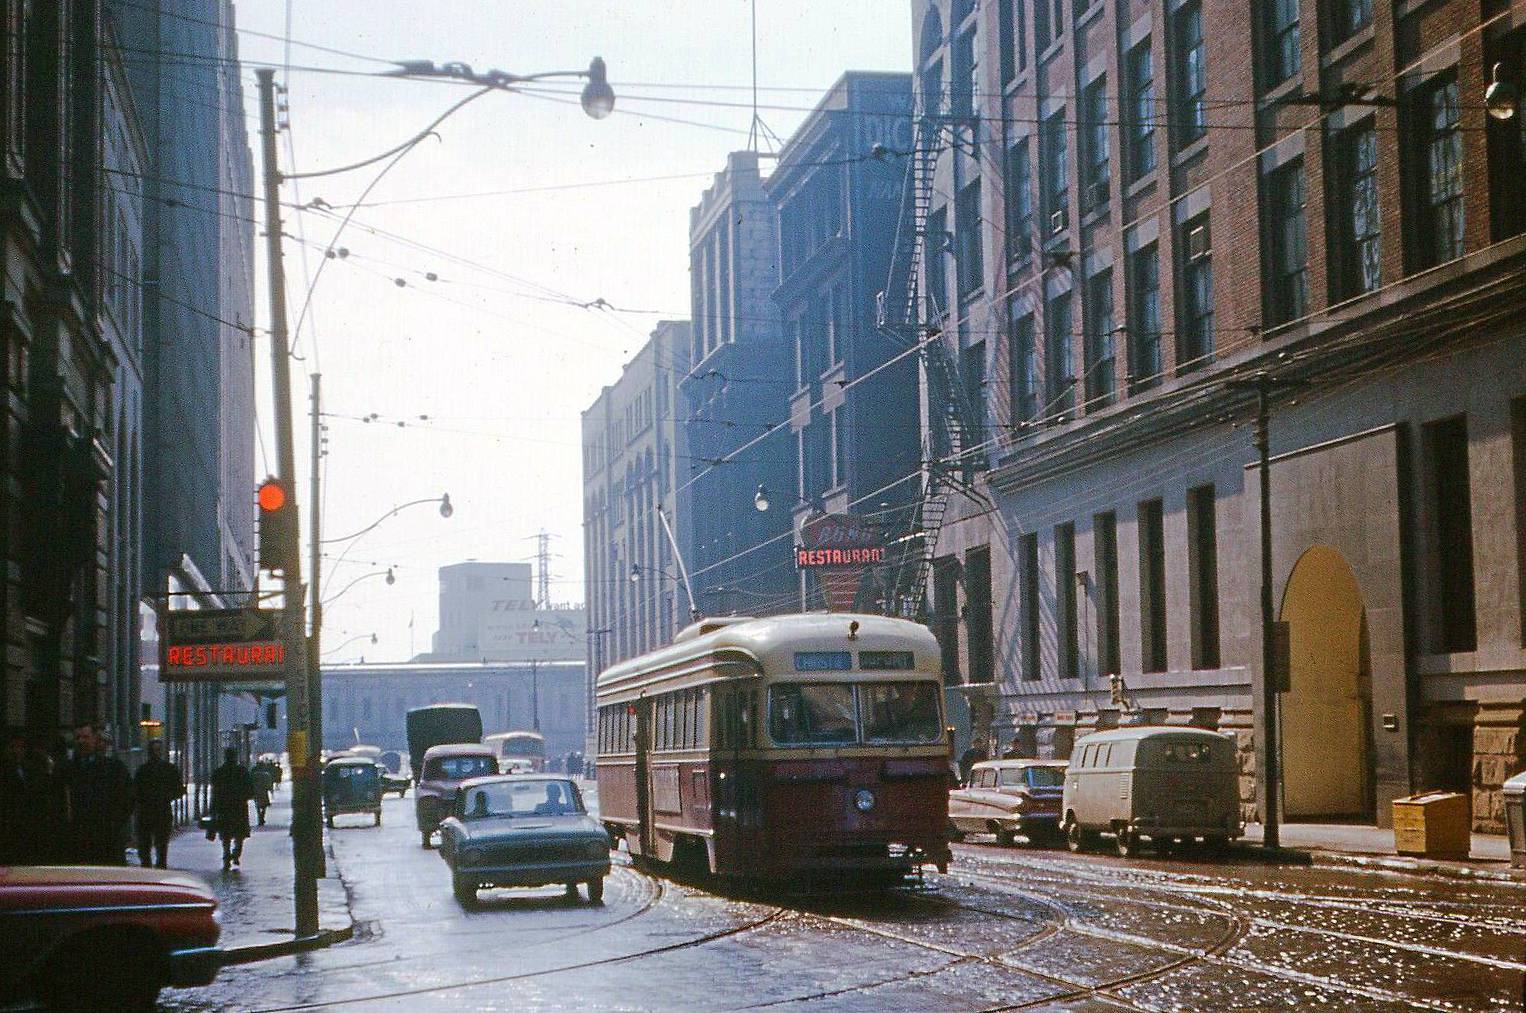 AA PHOTO - TORONTO - BAY STREET (I THINK) - JUST N OF FRONT LOOKING S - STREETCAR CARS - STREET LEVEL - 1963